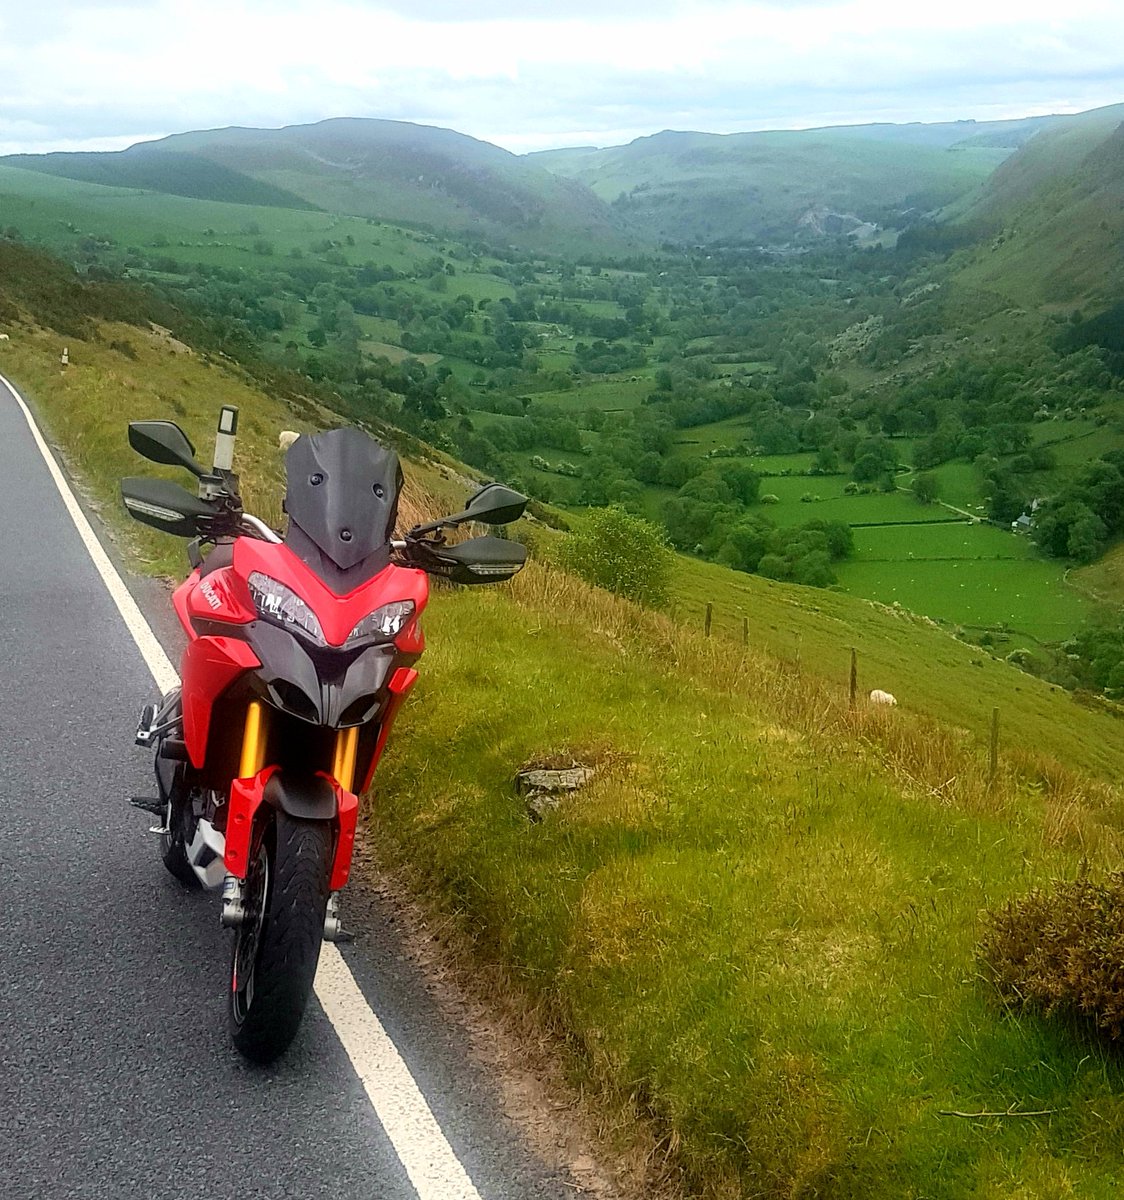 🏴󠁧󠁢󠁷󠁬󠁳󠁿🏍 Starting our Wales W500 3 day trip tomorrow with the lads, it's around 500 miles of the best roads carefully selected after years of going there. 7 of us in total so if you see us here us give us a wave 🙋‍♂️
#WALES #WalesRocks #Ducati